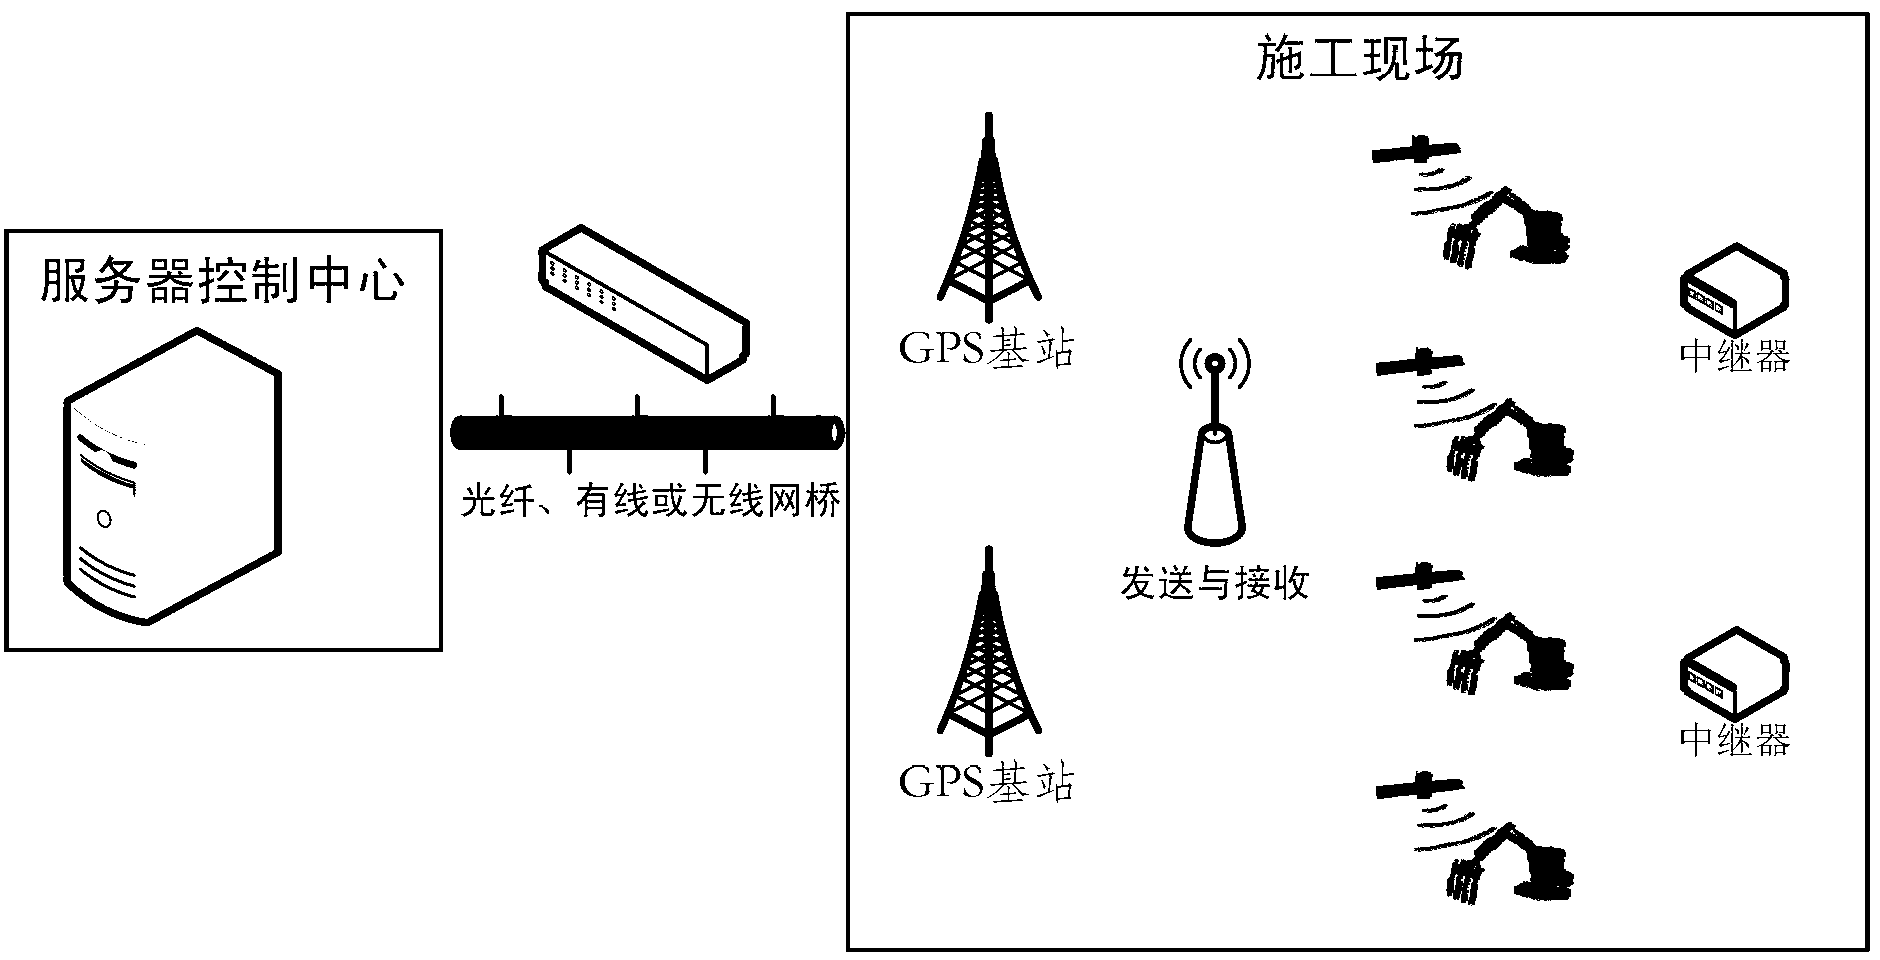 Concrete vibration quality monitoring and communication networking method